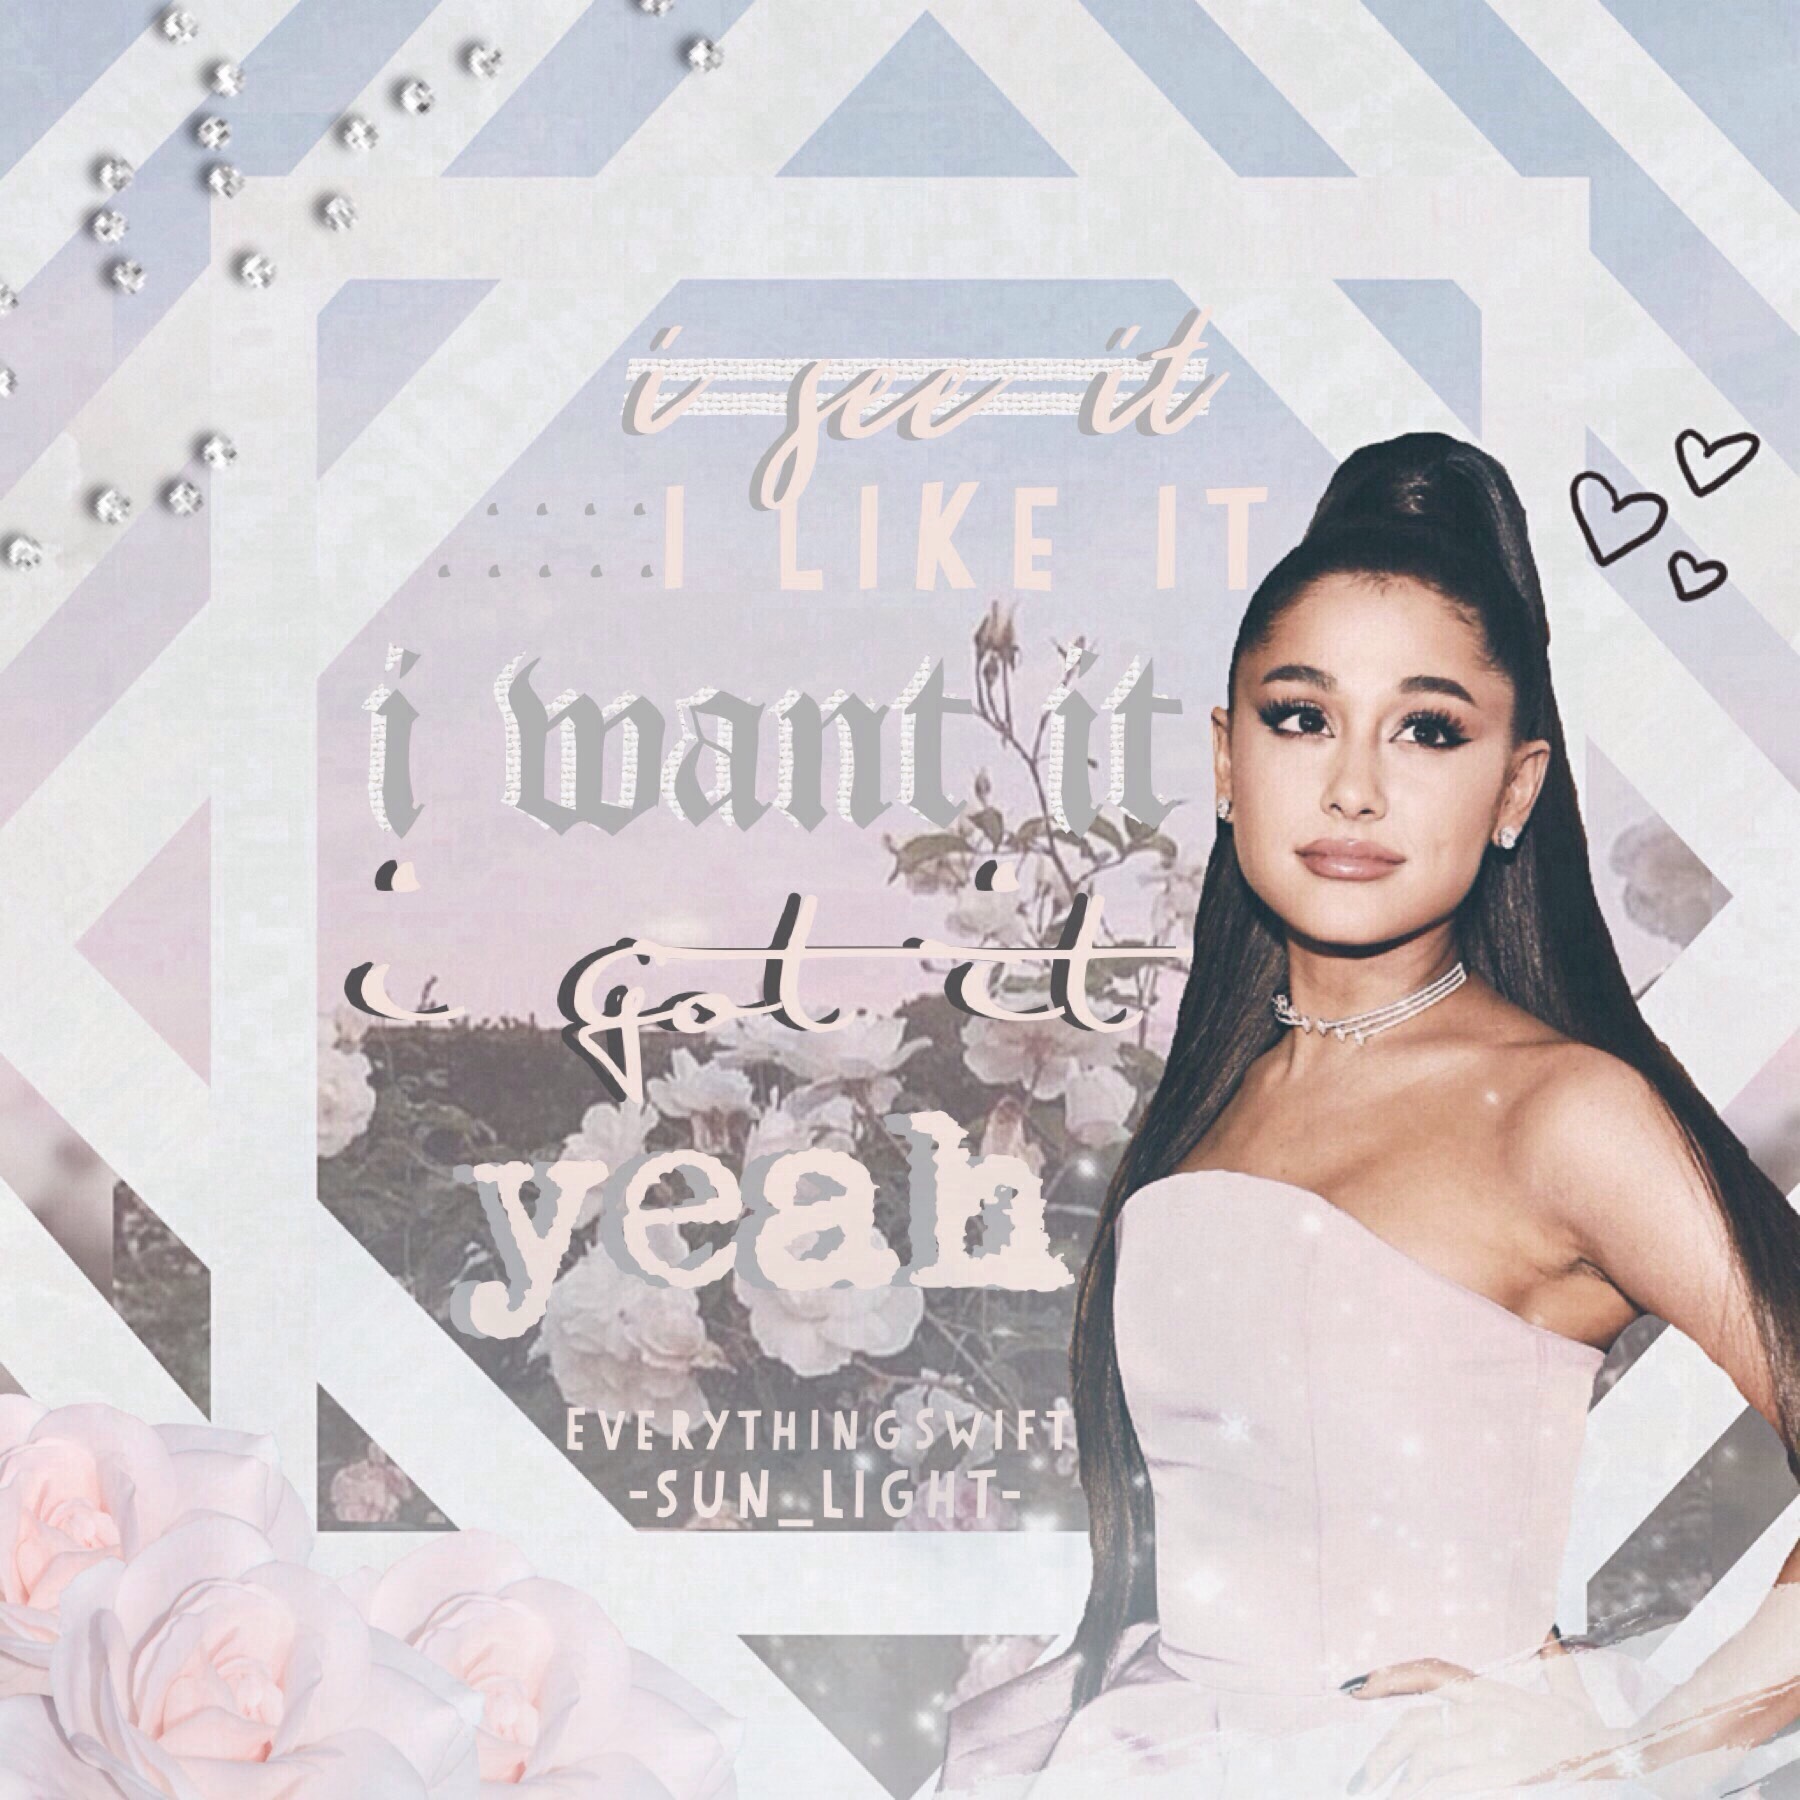 Collab with -SUN_L1GHT-! I'm in love with thank u, next! Tap! 💕
QOTD: Fav song on thank u, next?
AOTD: bloodline, NASA, in my head! 💖